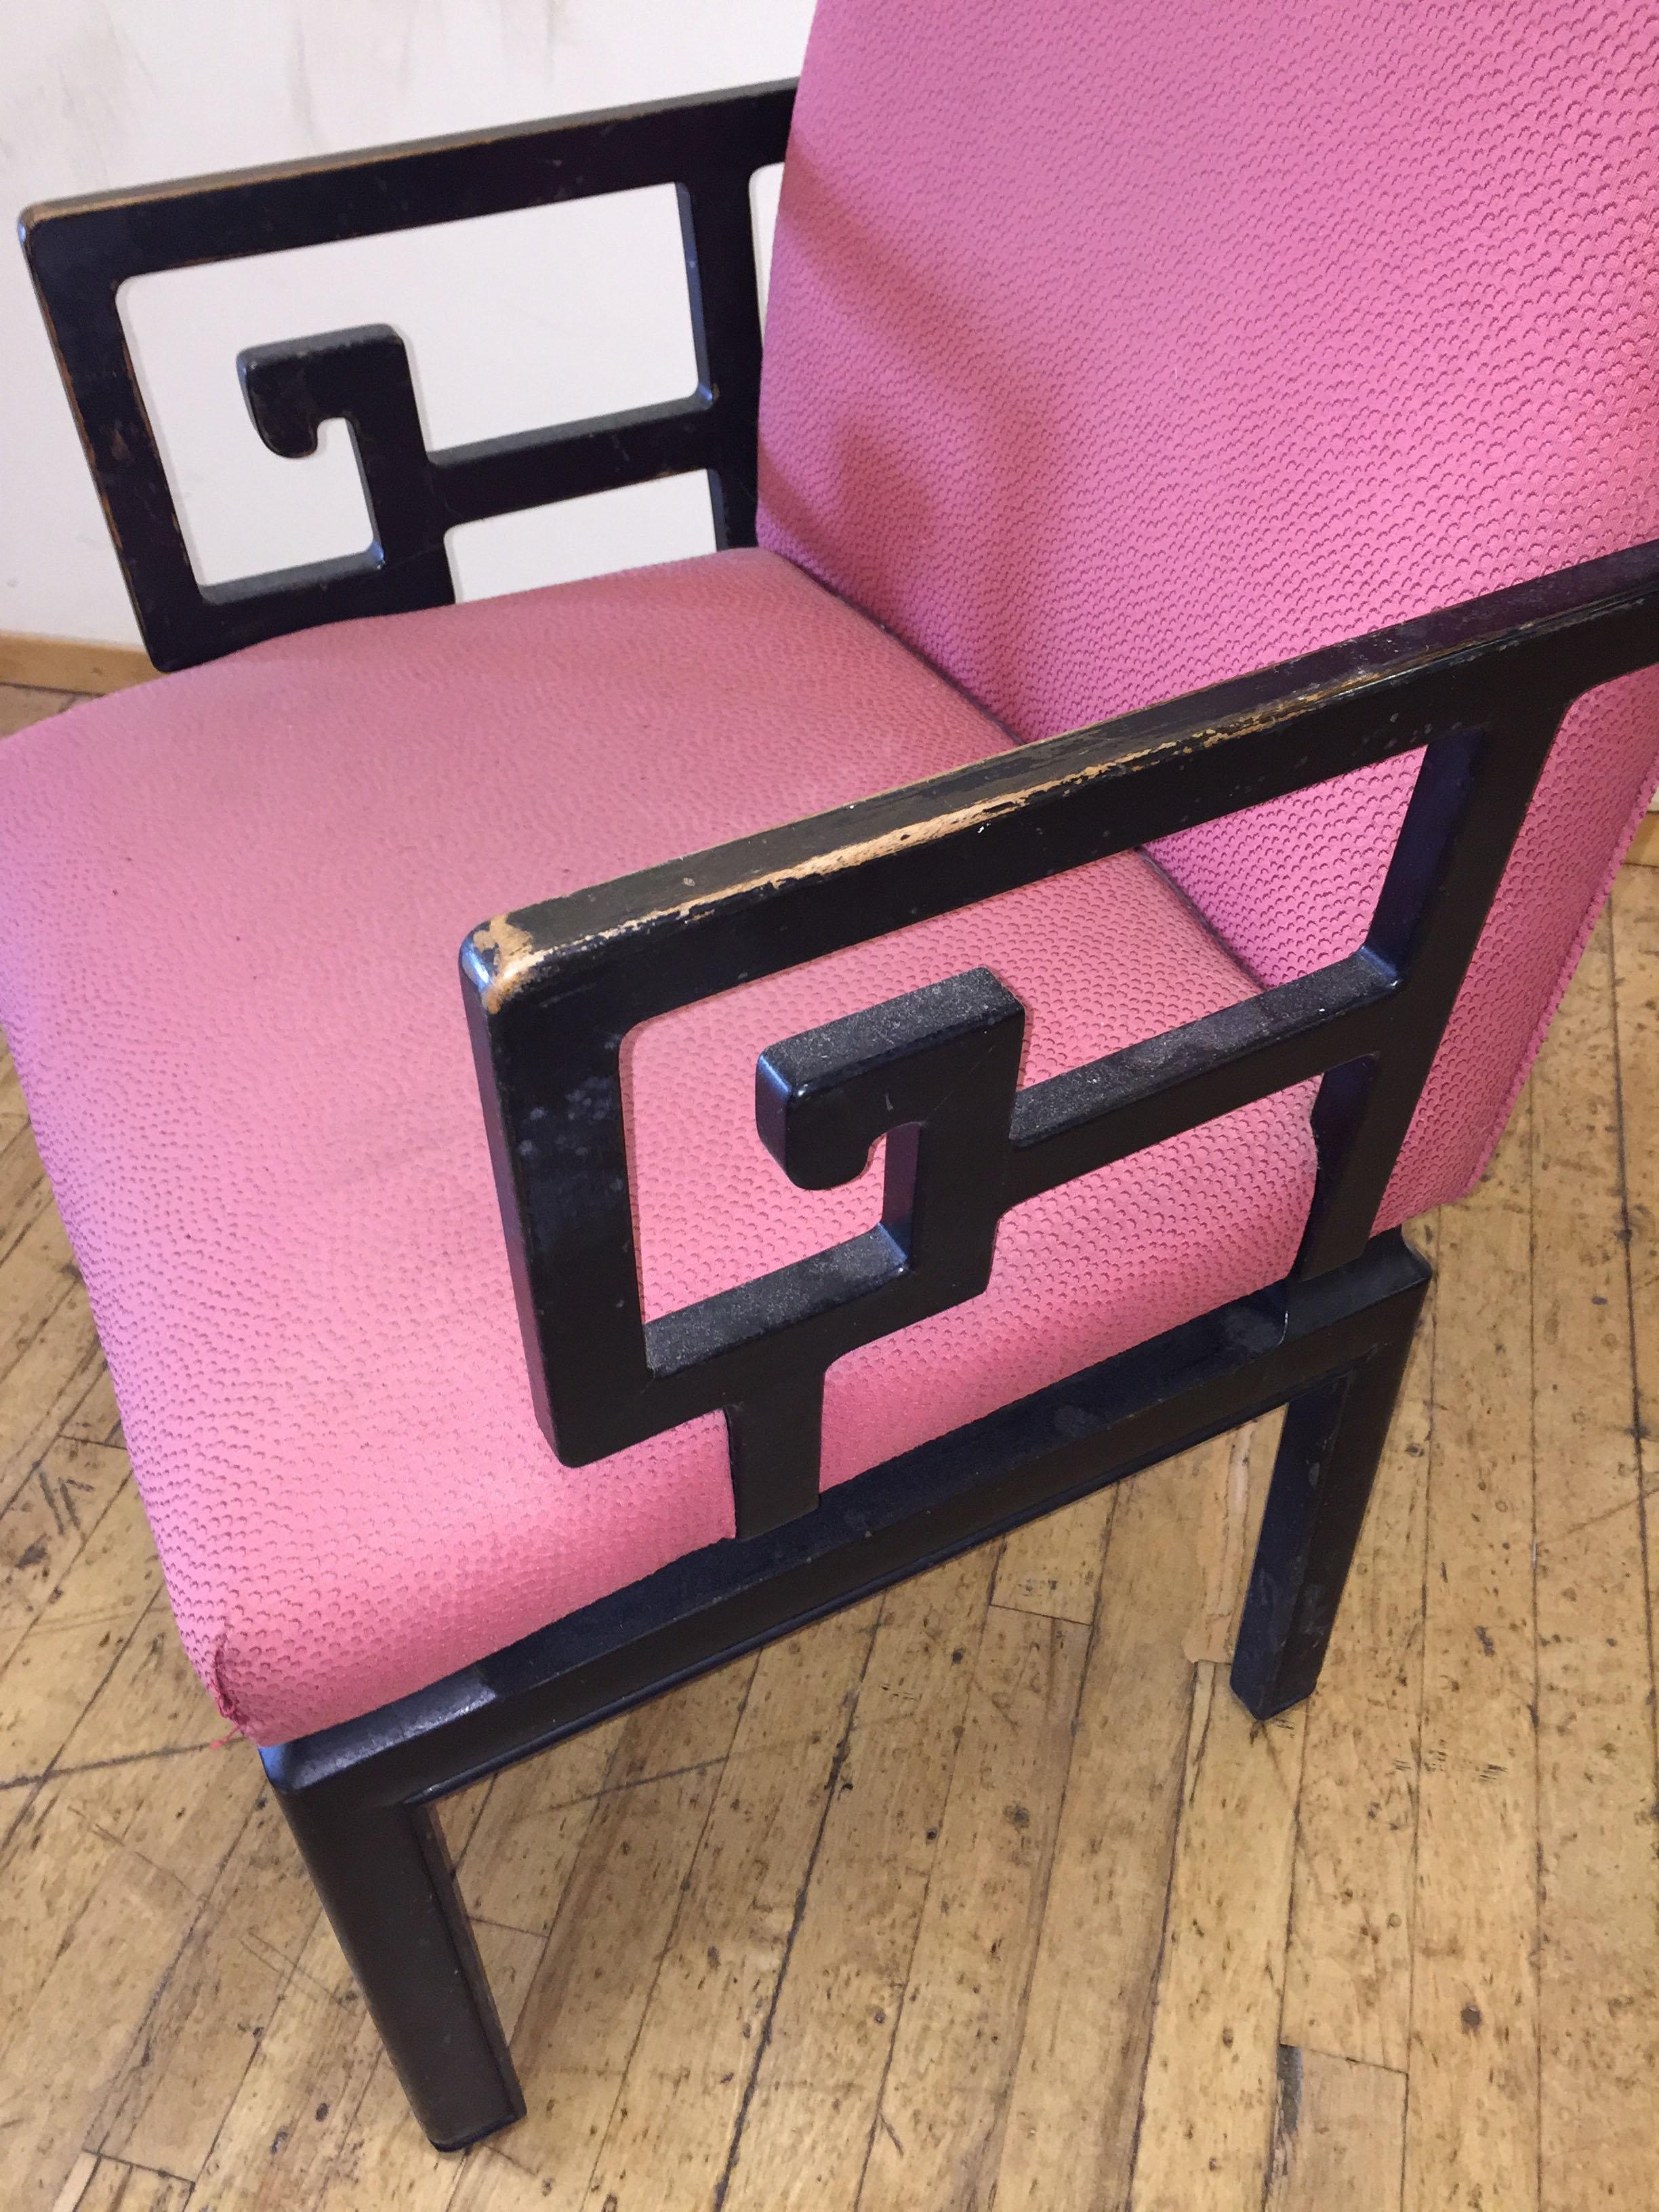 Vintage Greek key armchairs, Baker from the Far East Collection. Michael Taylor. In the manner of James Mont, Edward Wormley for Dunbar, Paul Frankl.

Price individually. We have 4 available at this time.

These are due for reupholstery.
Frames need